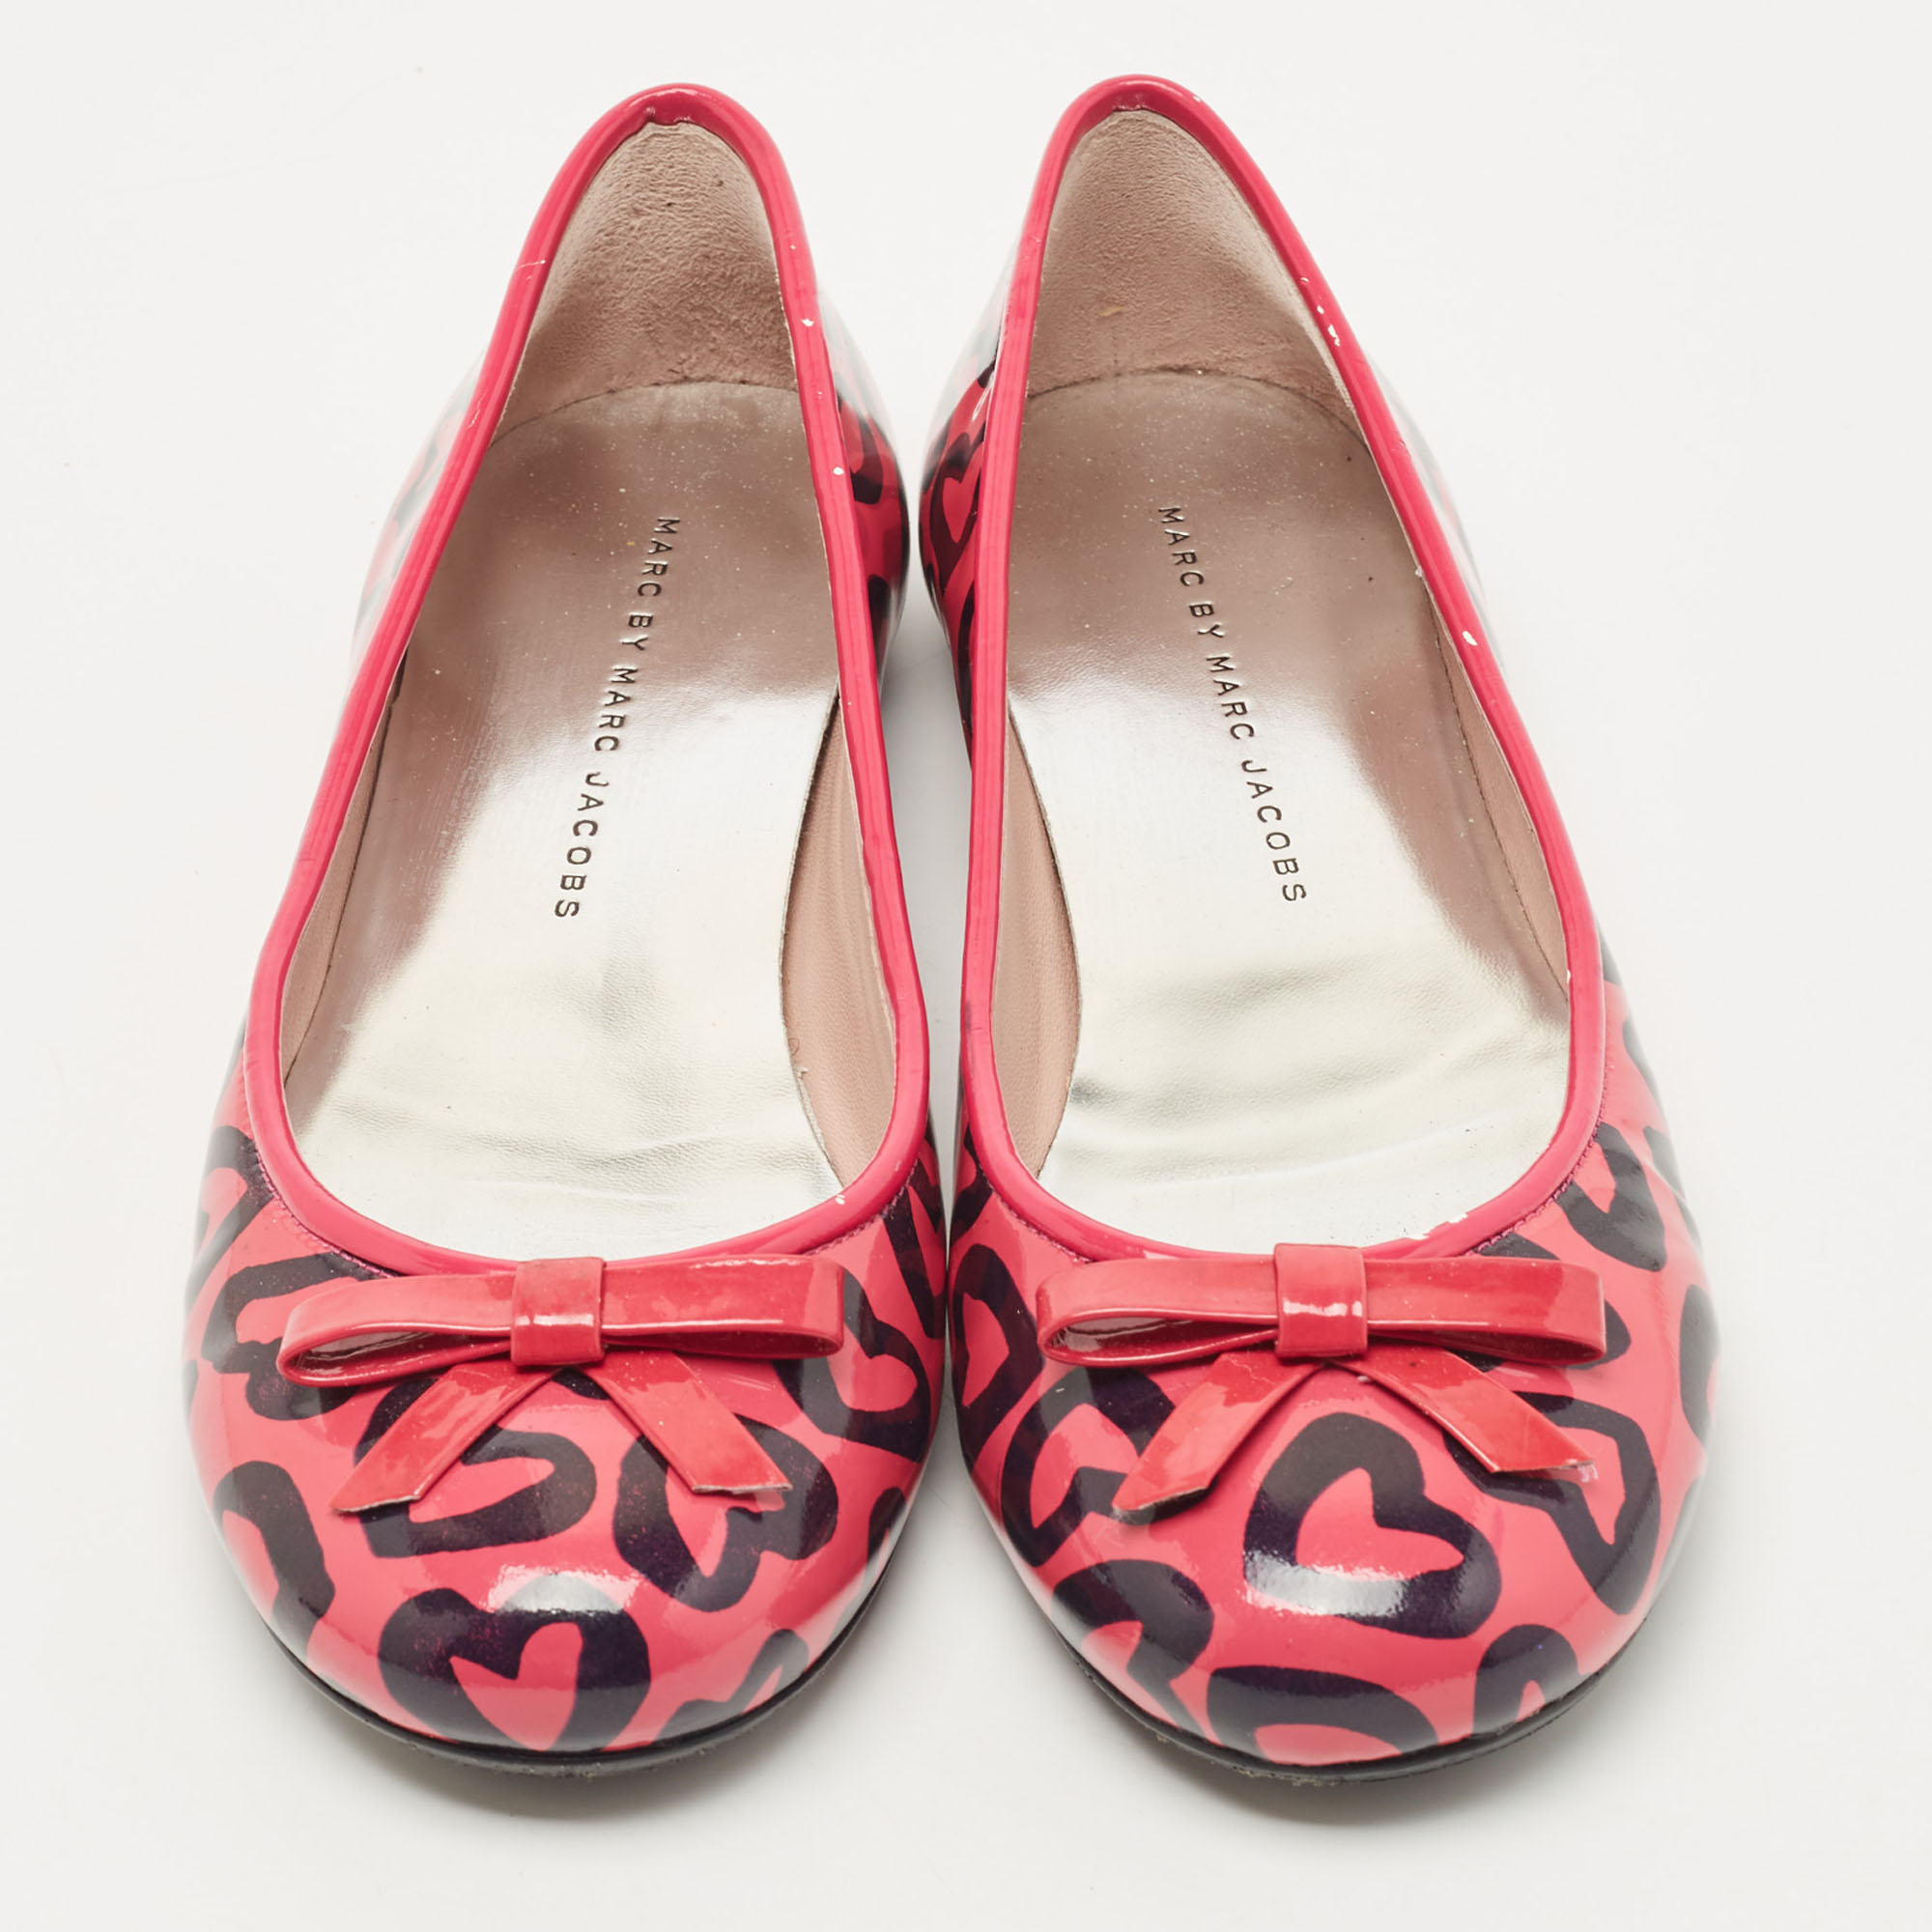 Marc By Marc Jacobs Pink/Black Heart Patent Leather Bow Ballet Flats Size 36